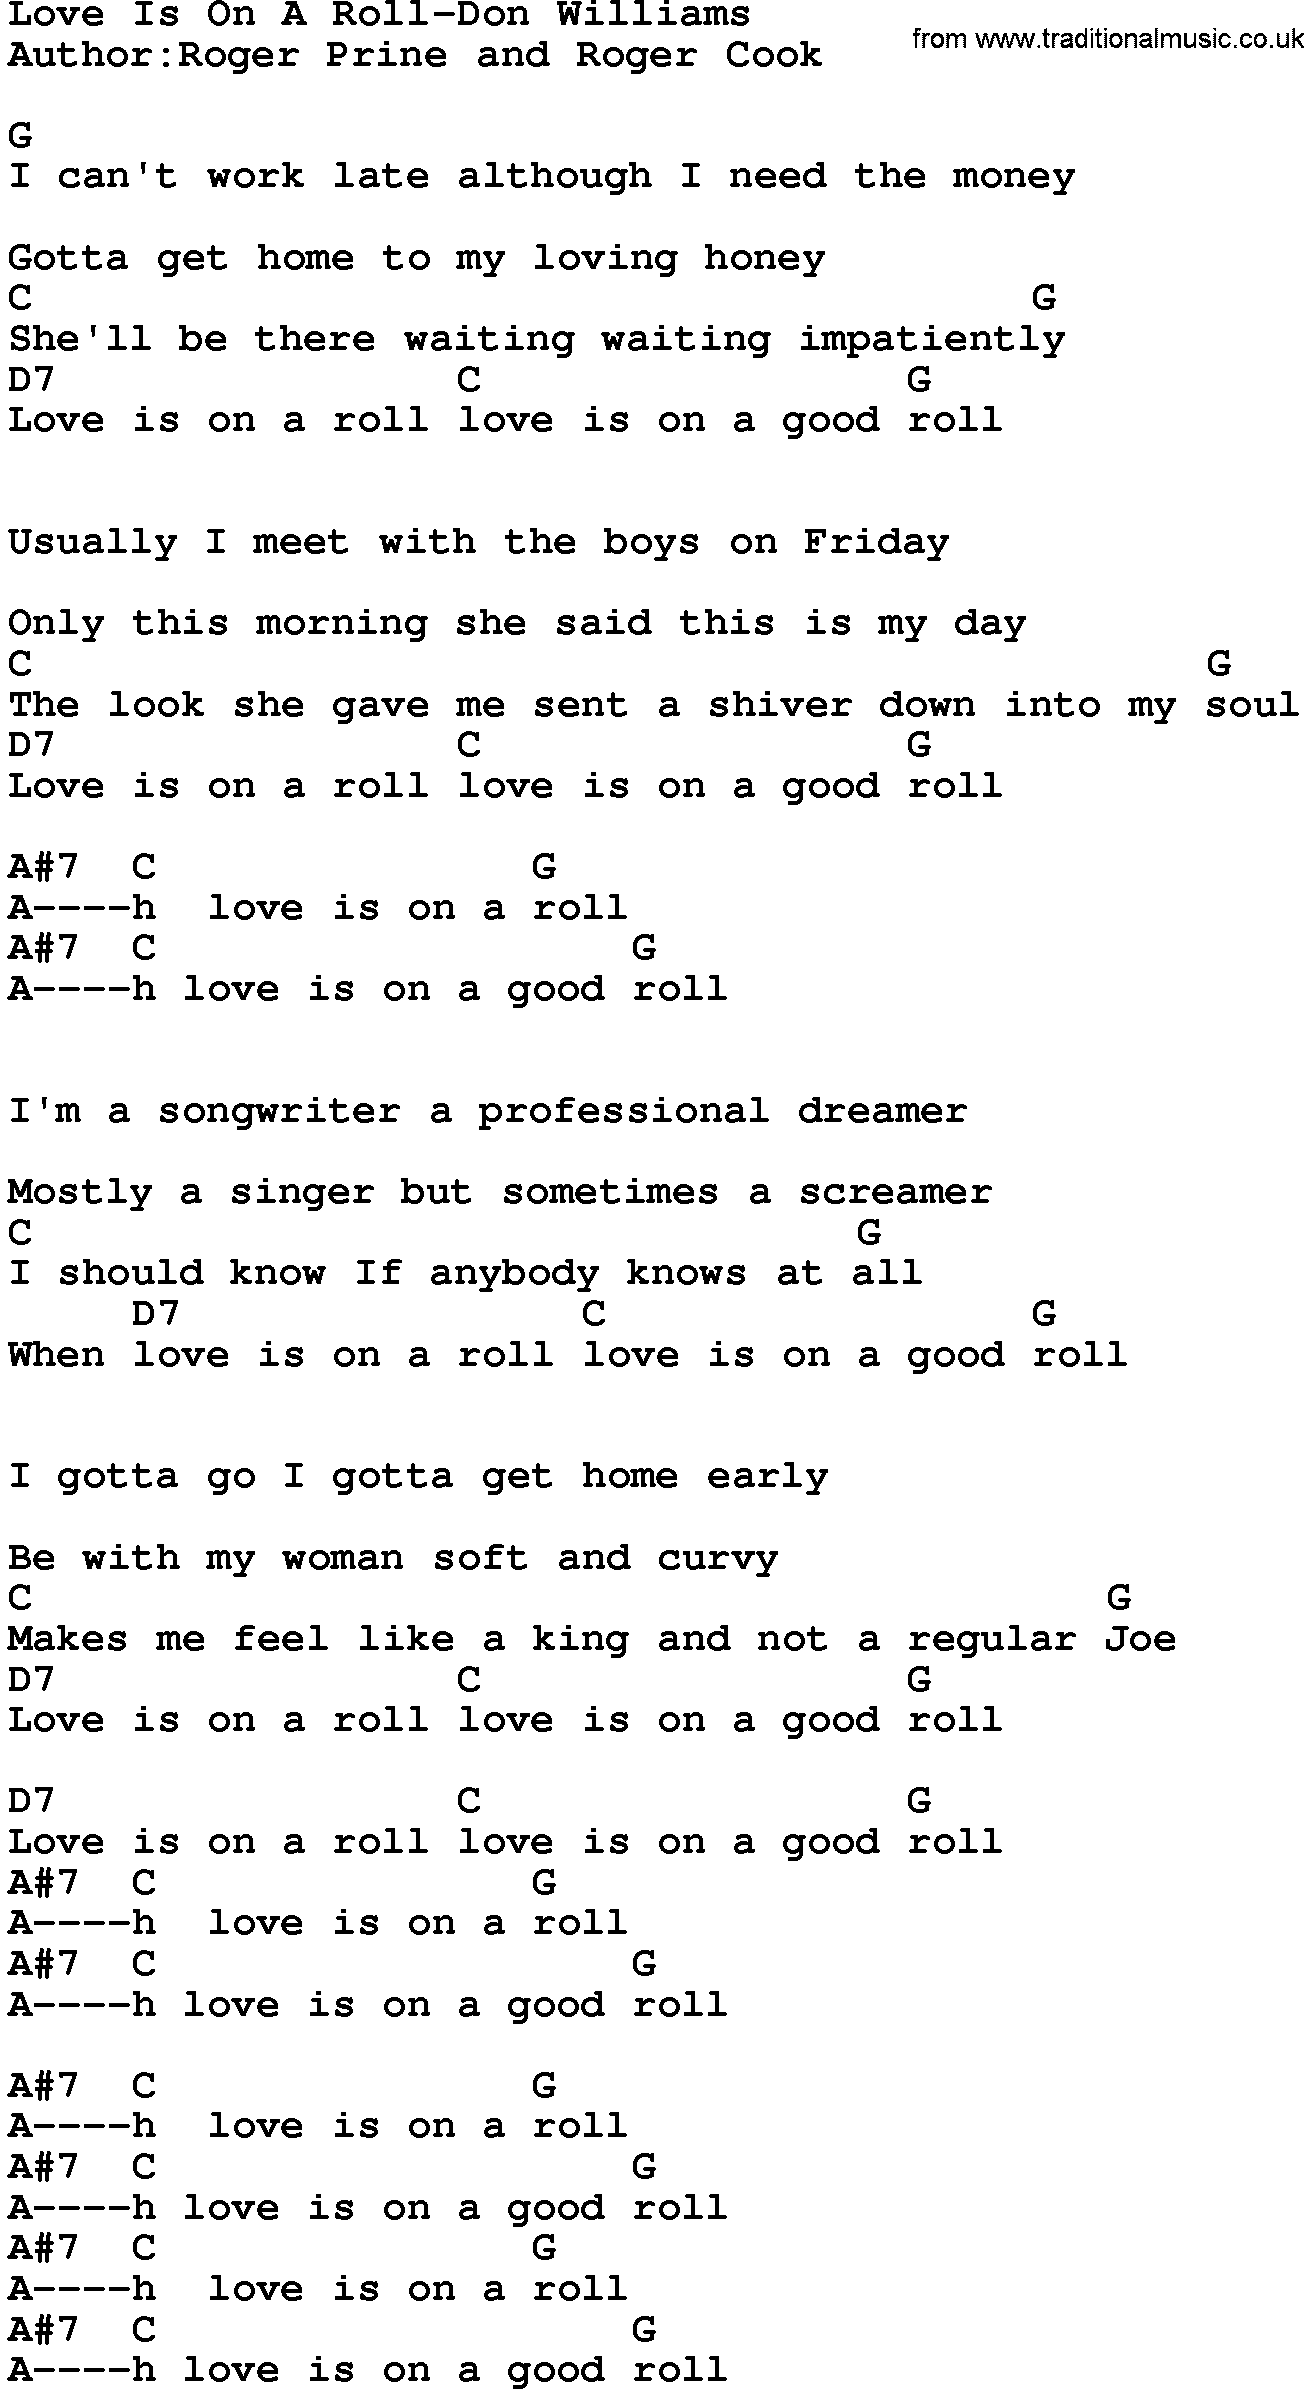 Country music song: Love Is On A Roll-Don Williams lyrics and chords